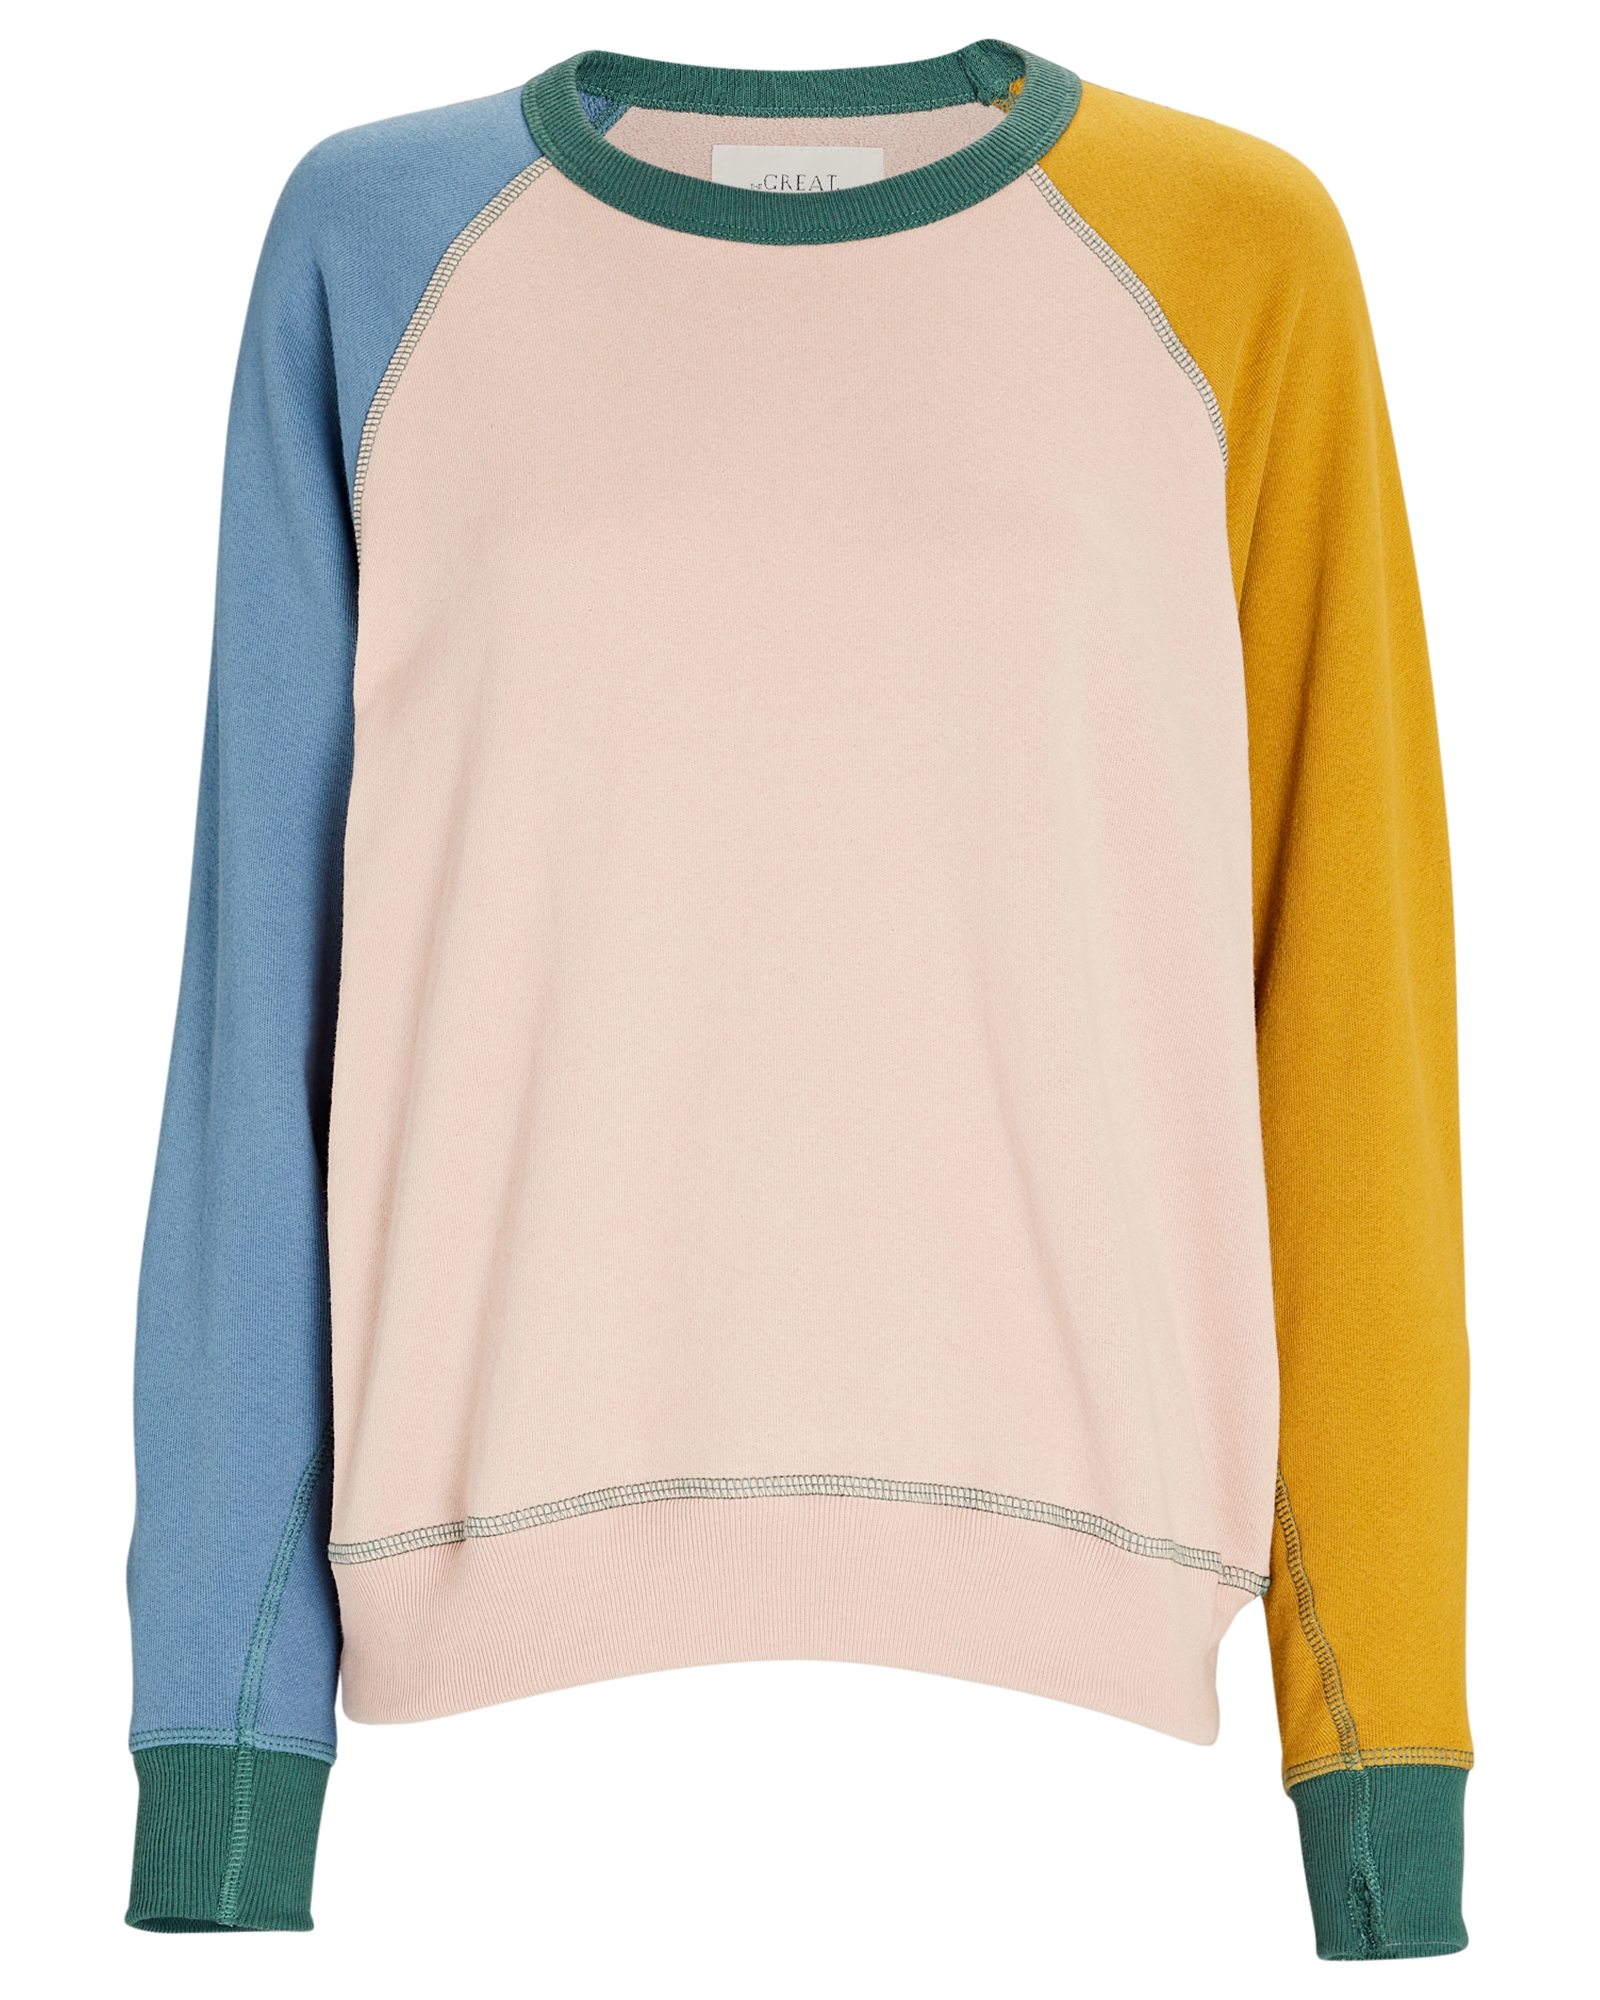 The Great The College Colorblock Sweatshirt | INTERMIX®